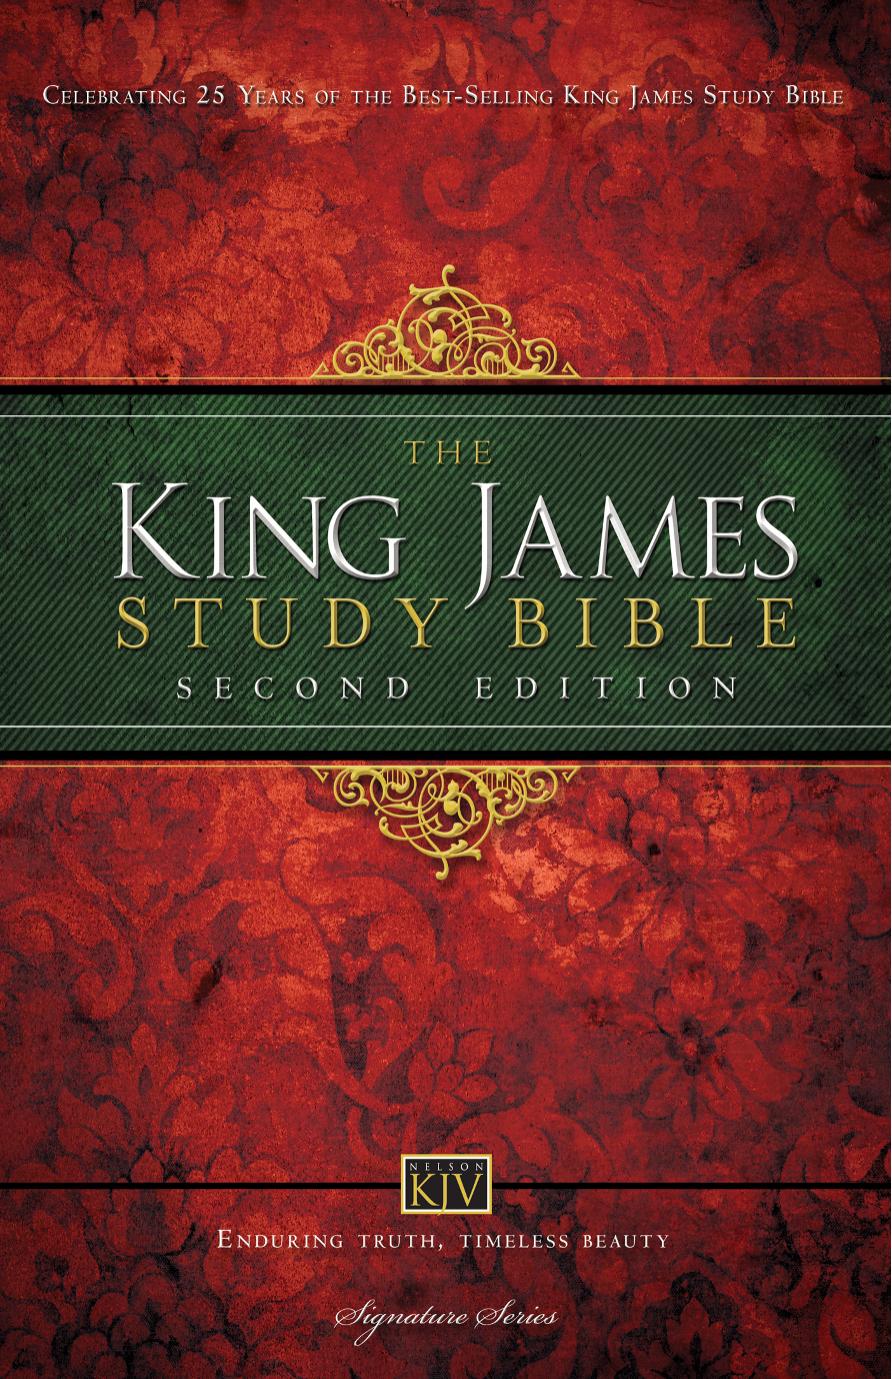 King James Study Bible by Thomas Nelson